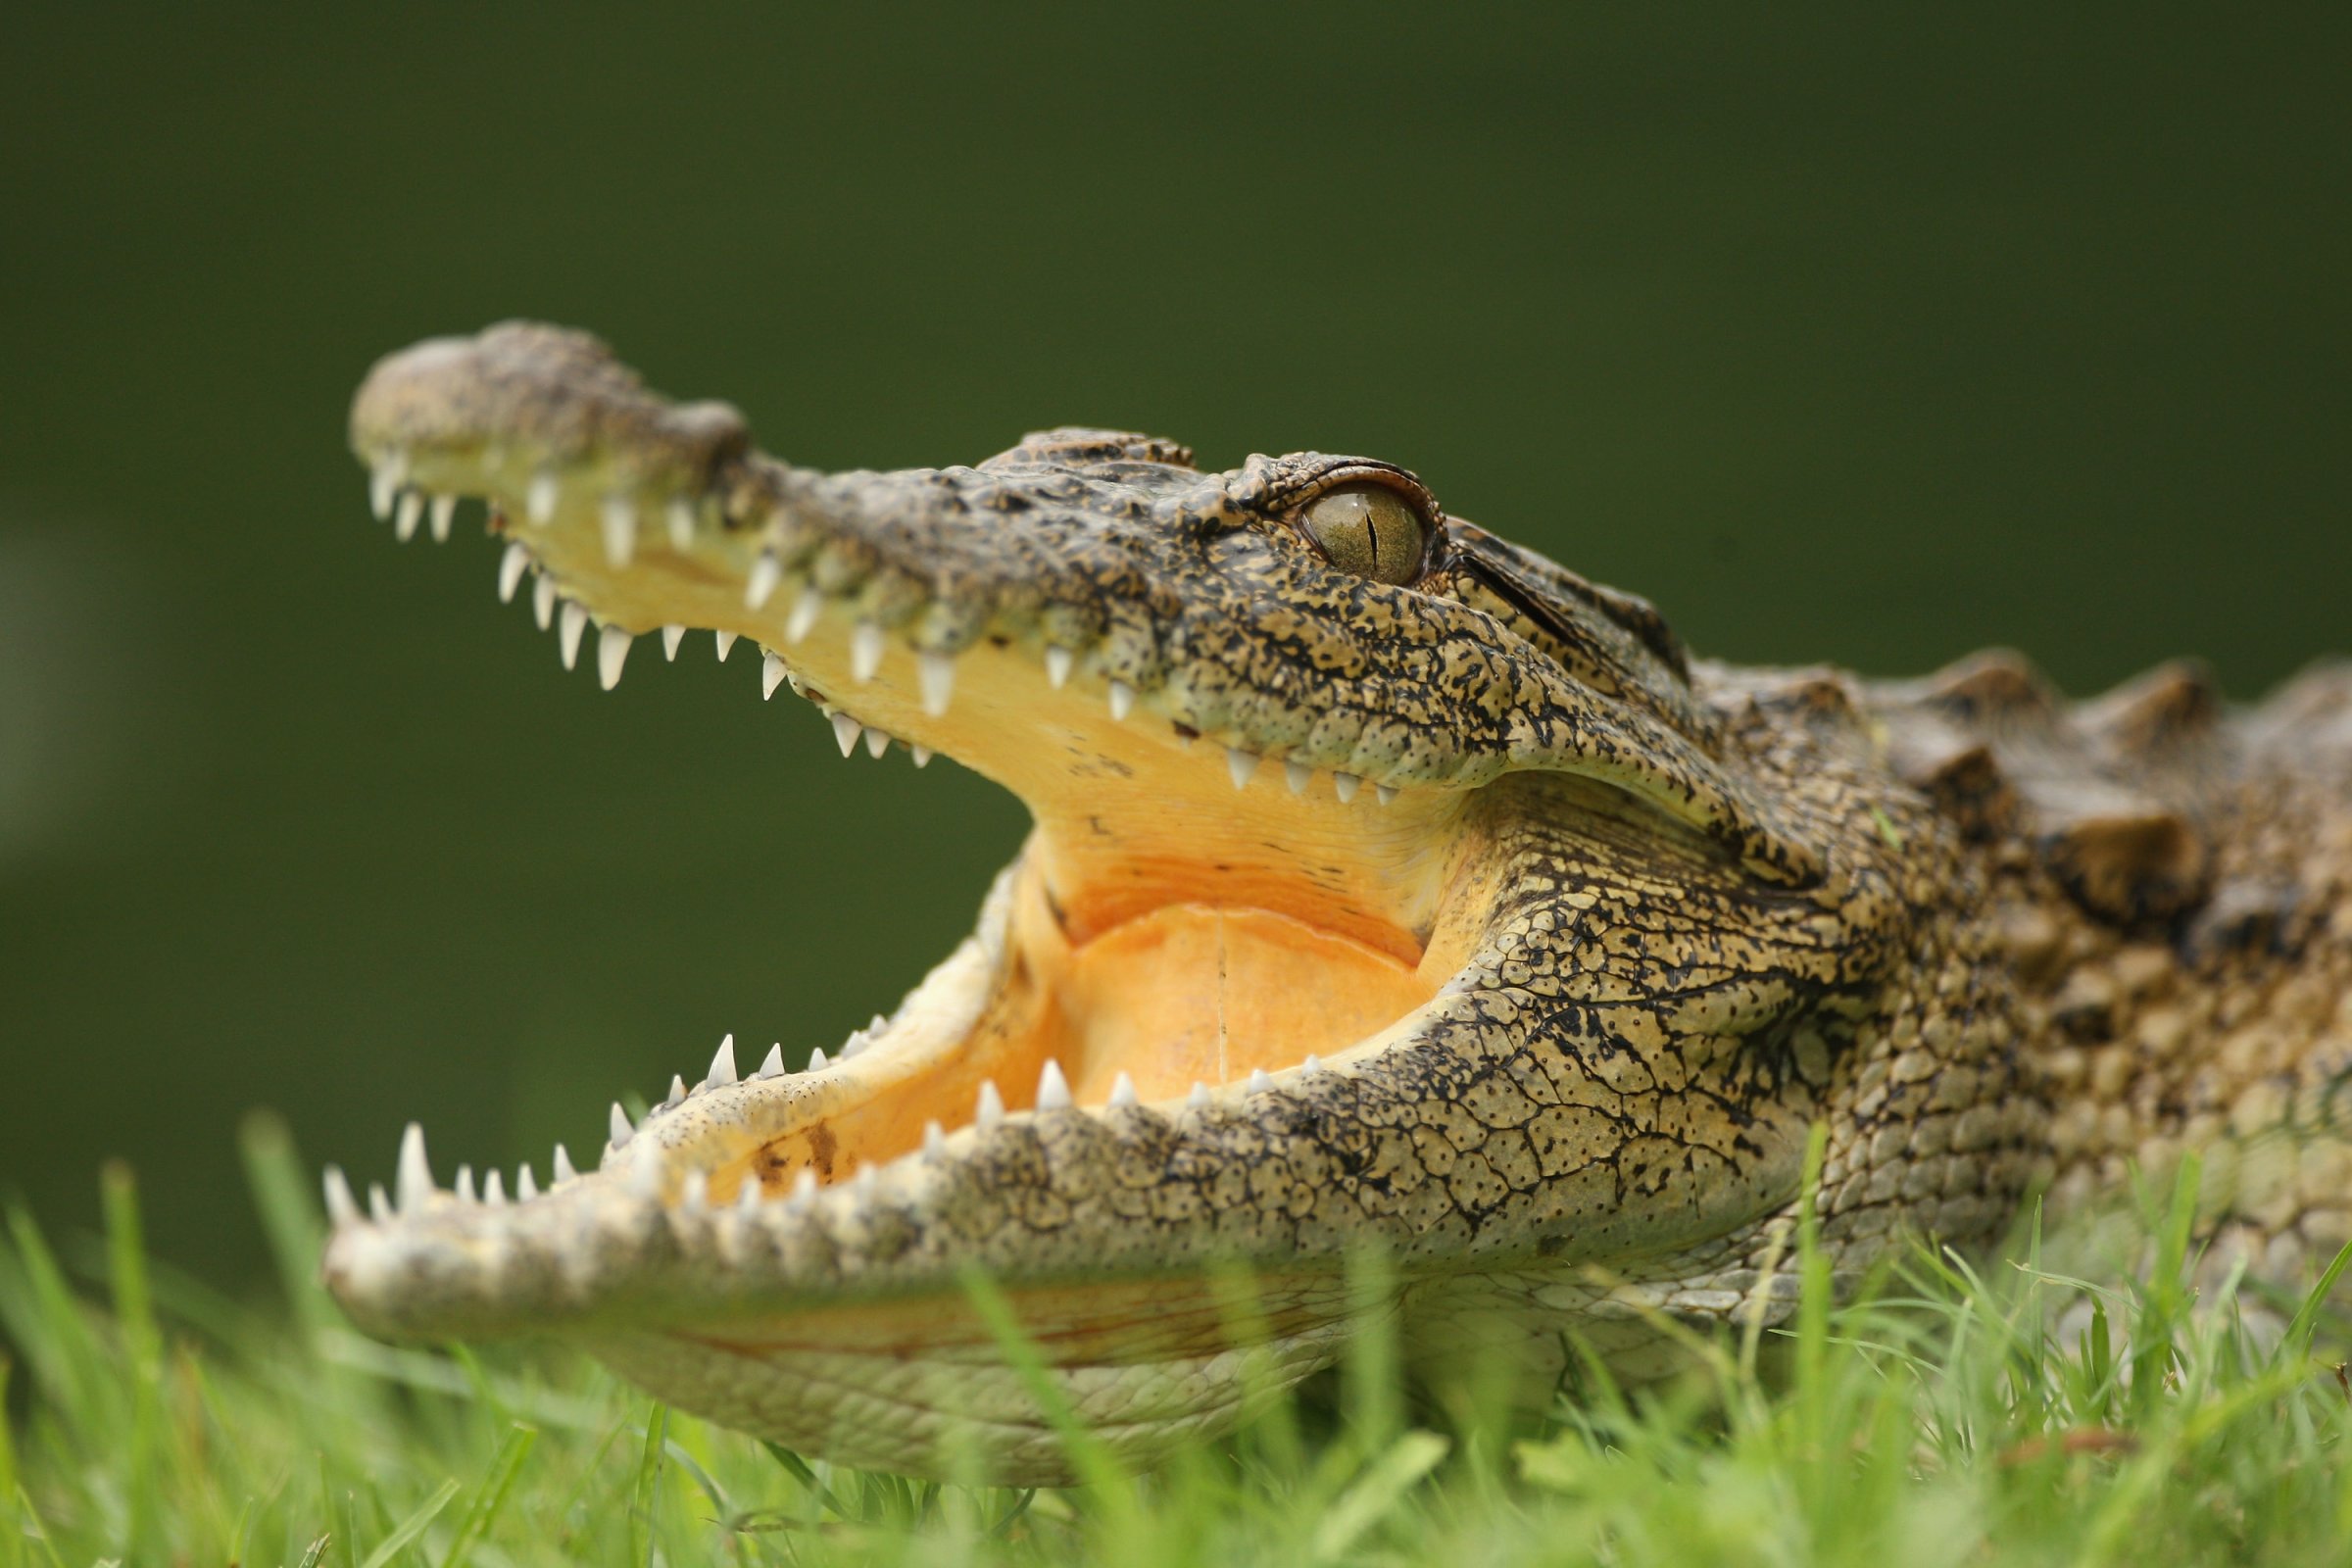 A crocodile lies in wait by the 13th green during practice before the Alfred Dunhill Championship at Leopard Creek Country Club on December 9, 2008 in Malelane, South Africa. (Photo by Warren Little/Getty Images)